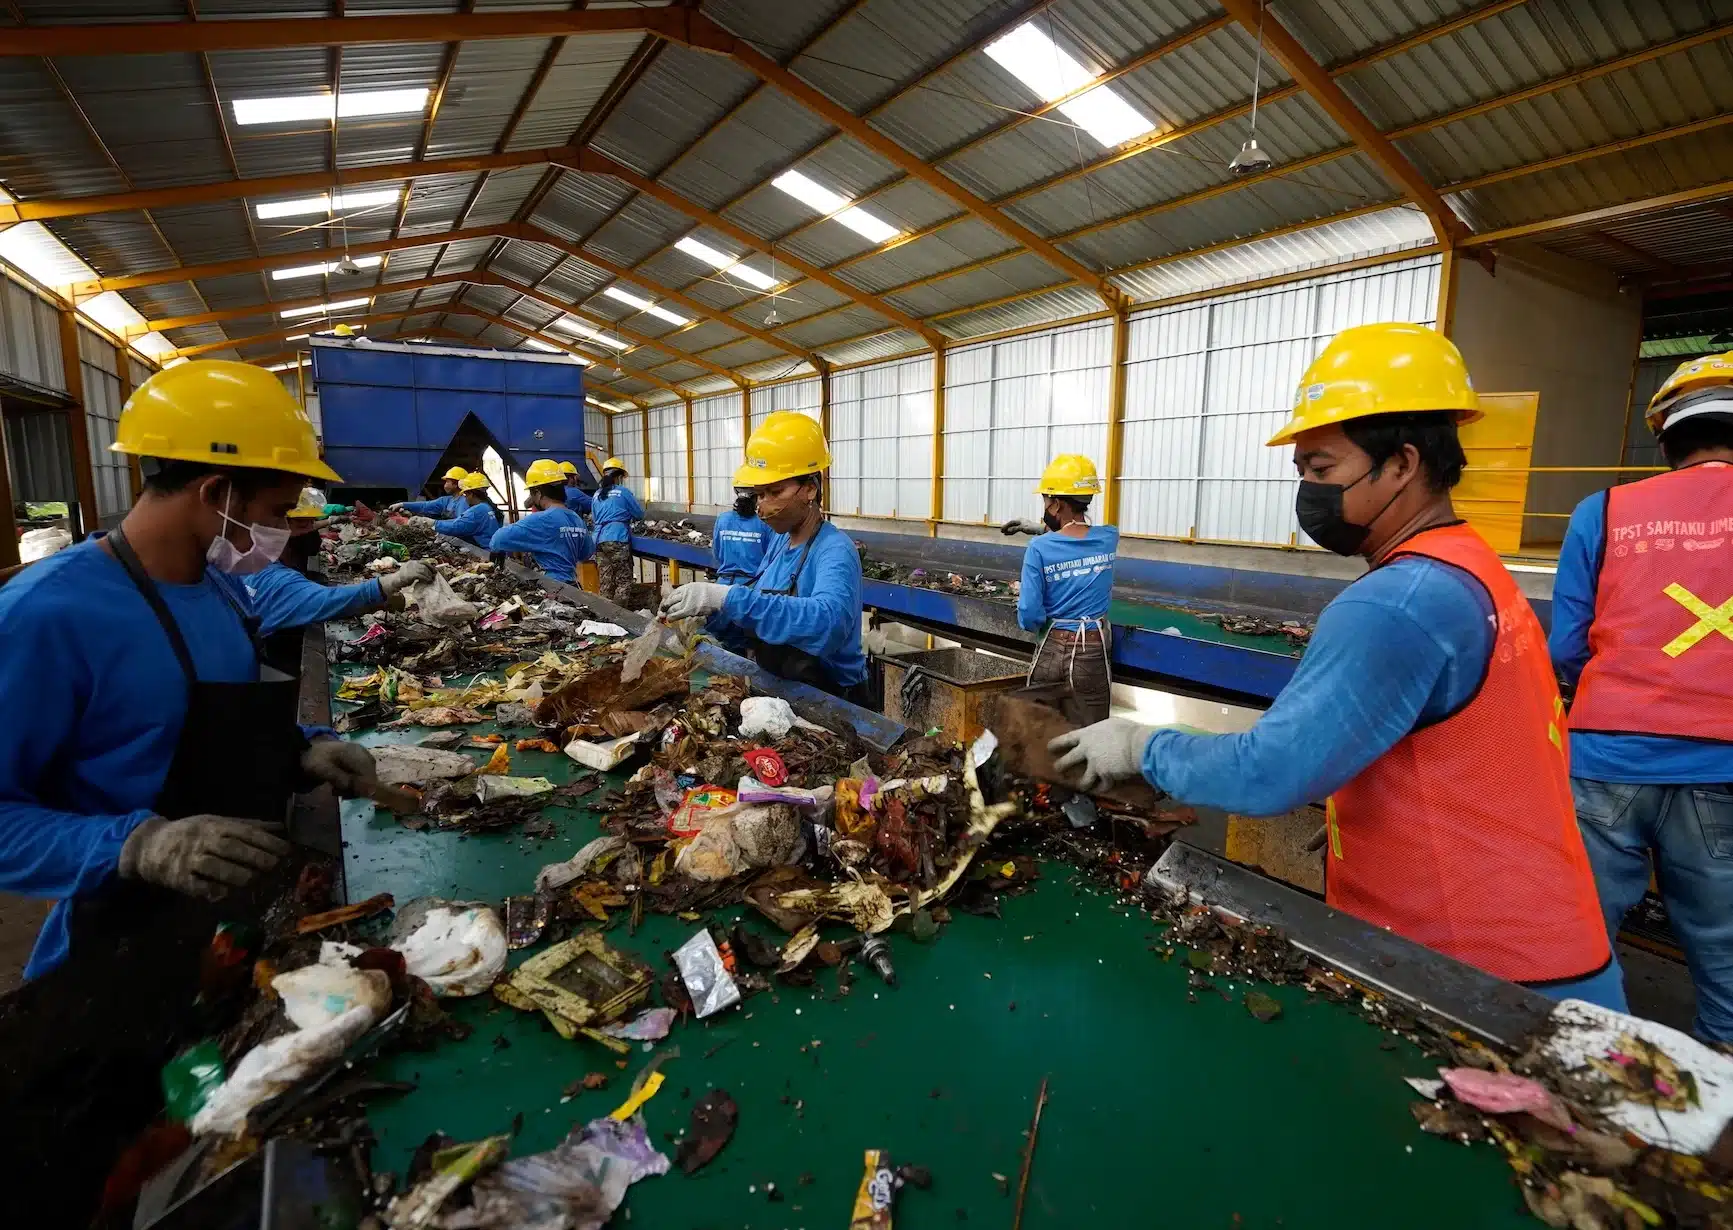 Photograph of people sorting through waste